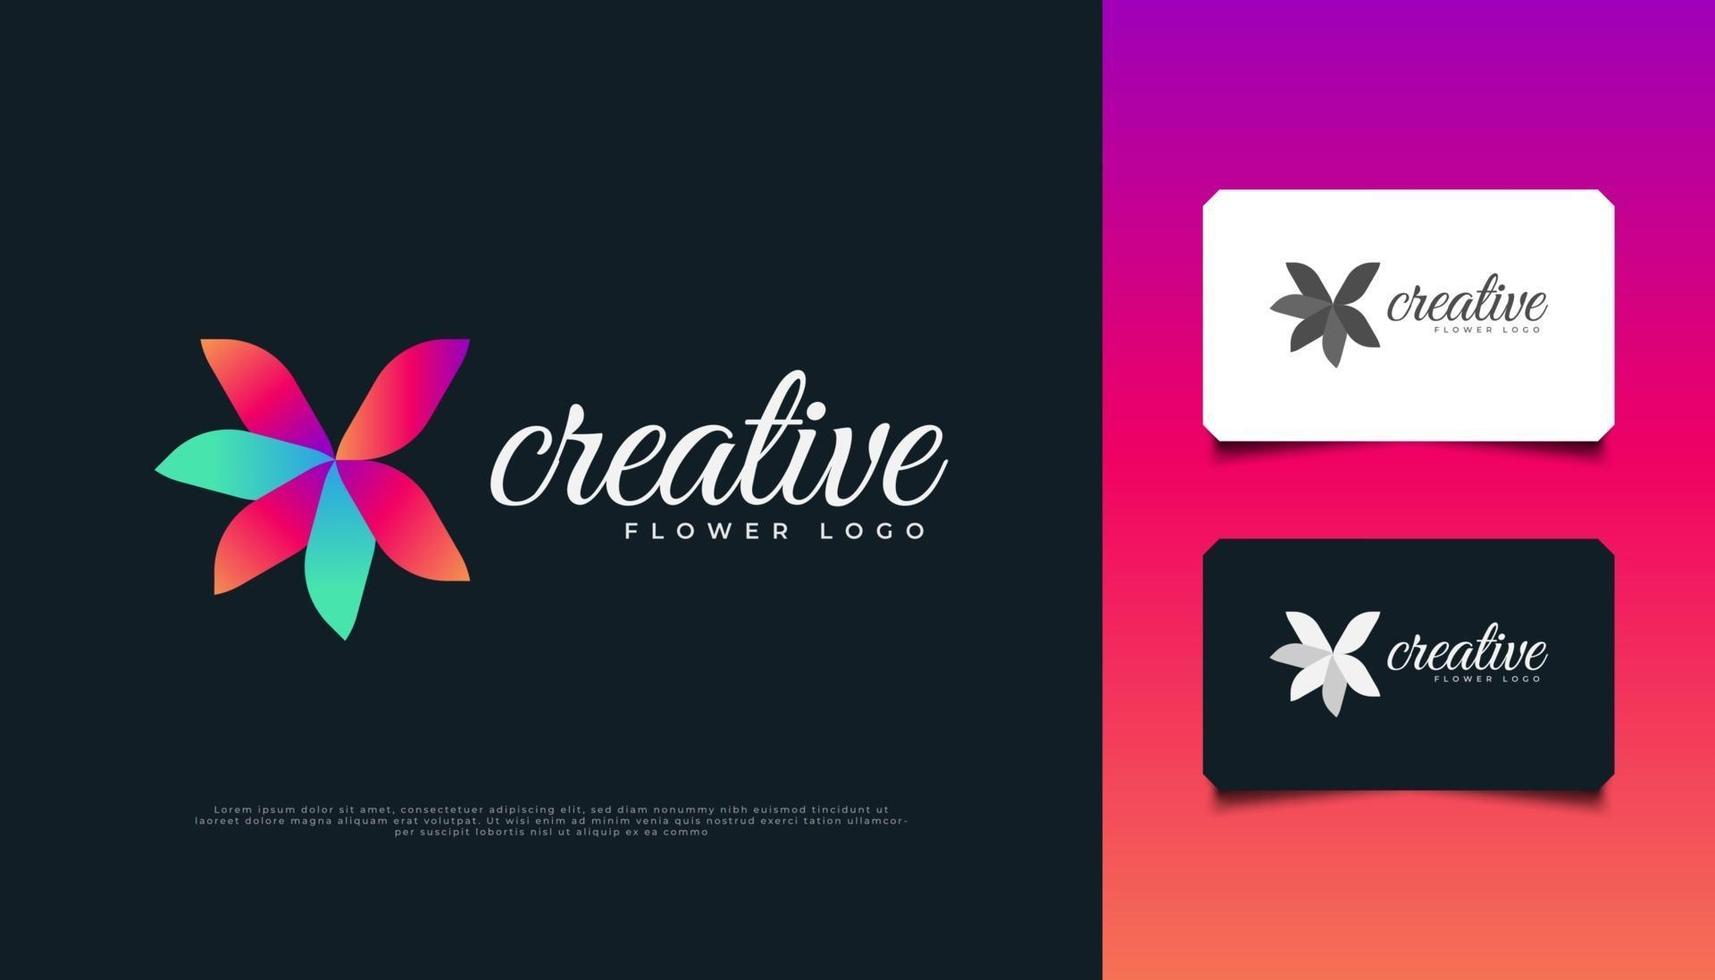 Colorful Flower Logo Design with Modern Concept. Colorful Leaf Ornament, Suitable for Spa, Beauty, Resort, Creative Company or Cosmetic Product Identity vector